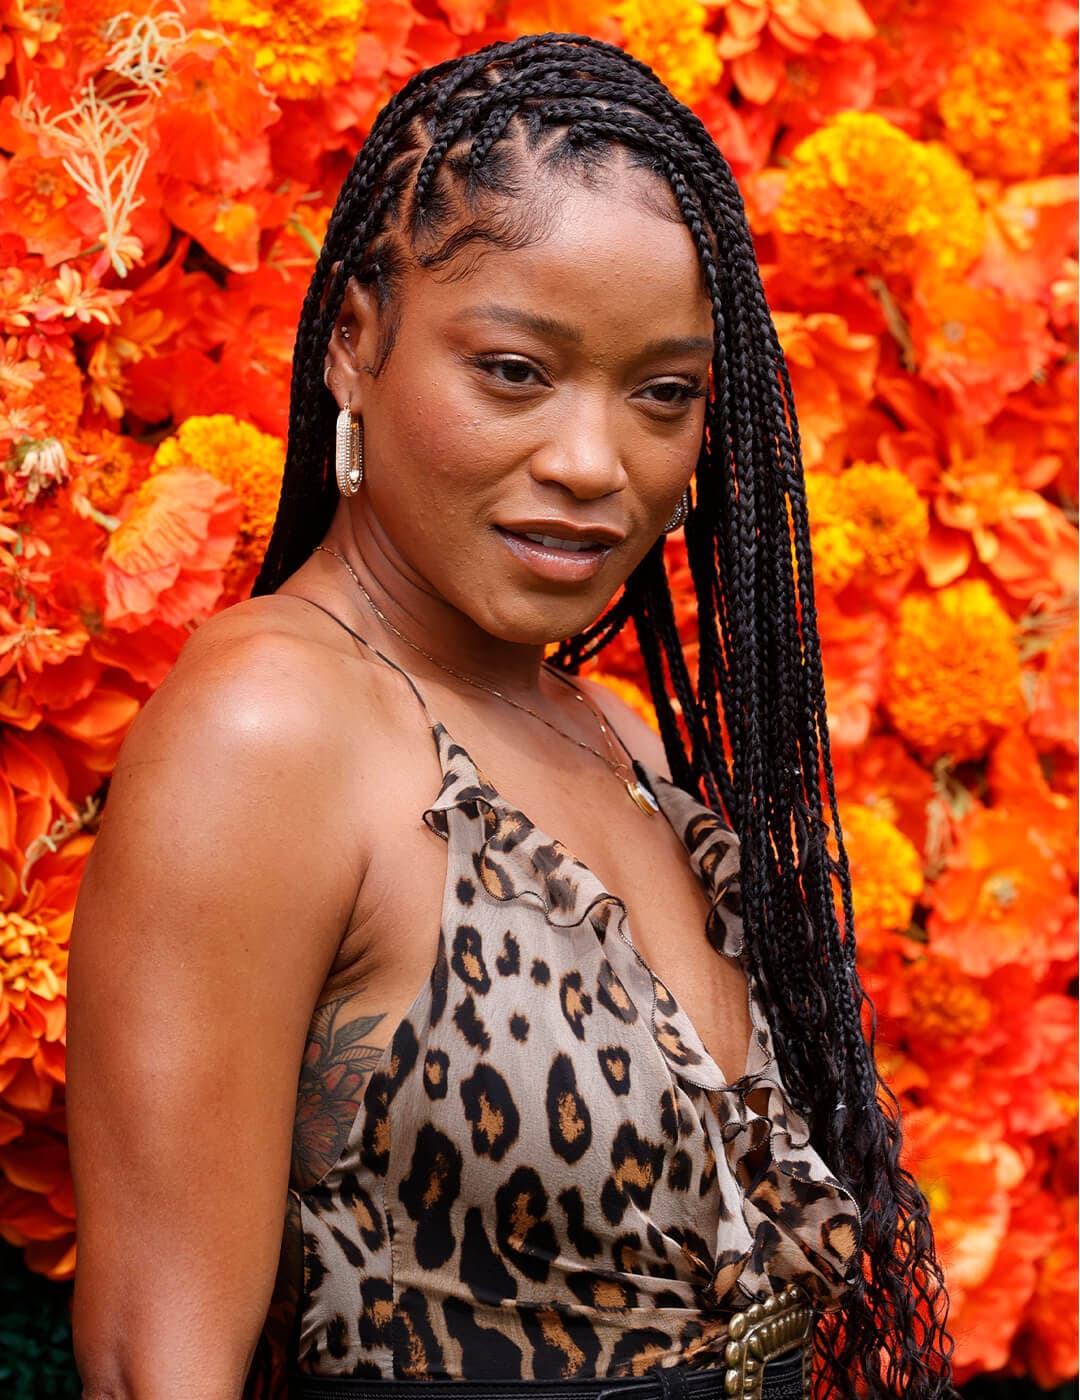 Keke Palmer rocking a side part braided hairstyle and leopard print dress against orange flowers